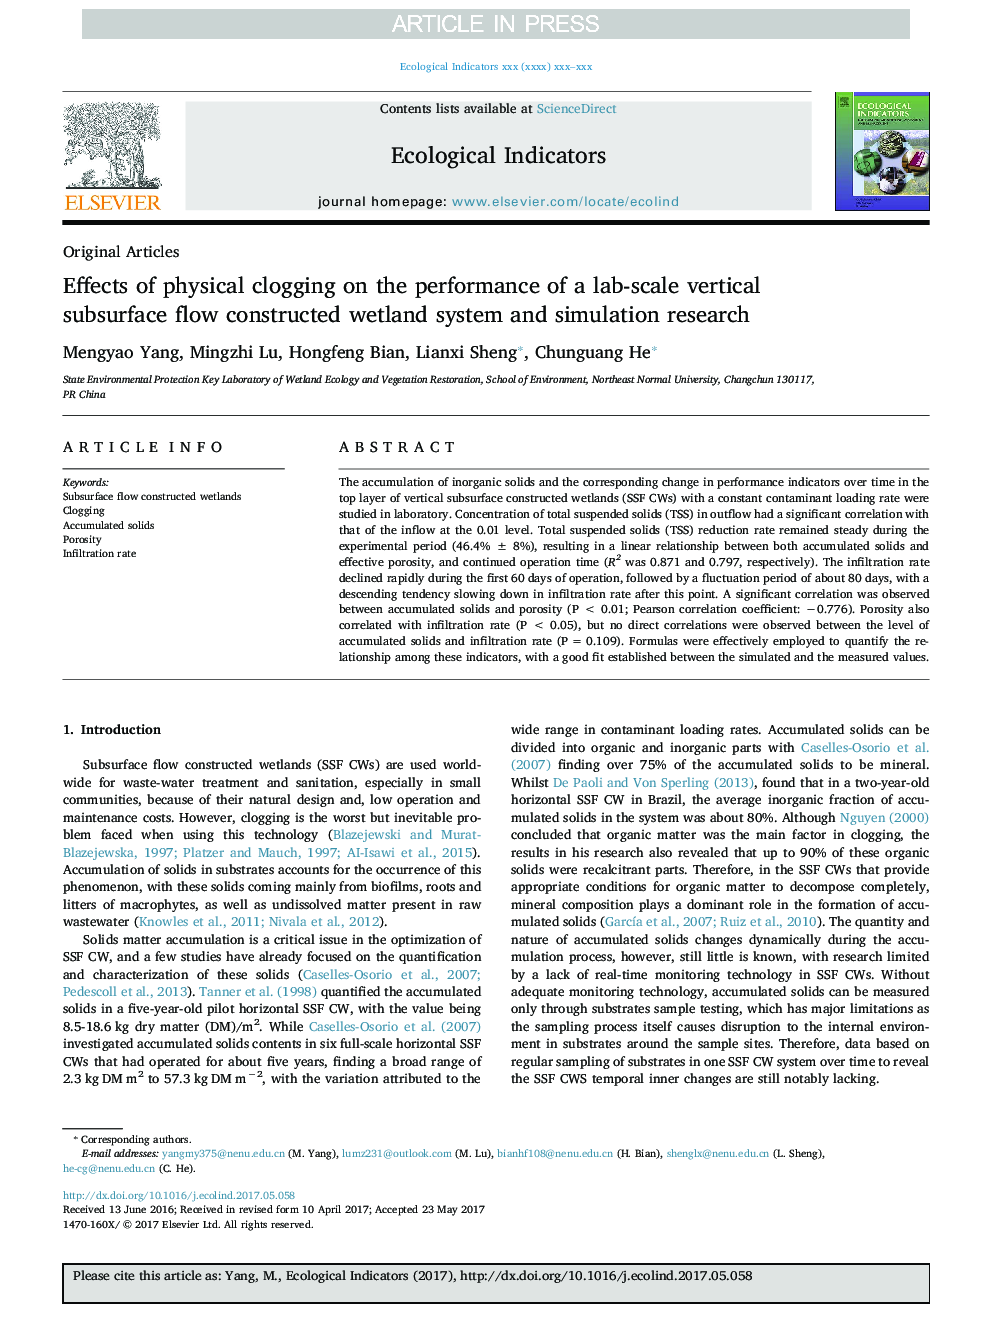 Effects of physical clogging on the performance of a lab-scale vertical subsurface flow constructed wetland system and simulation research